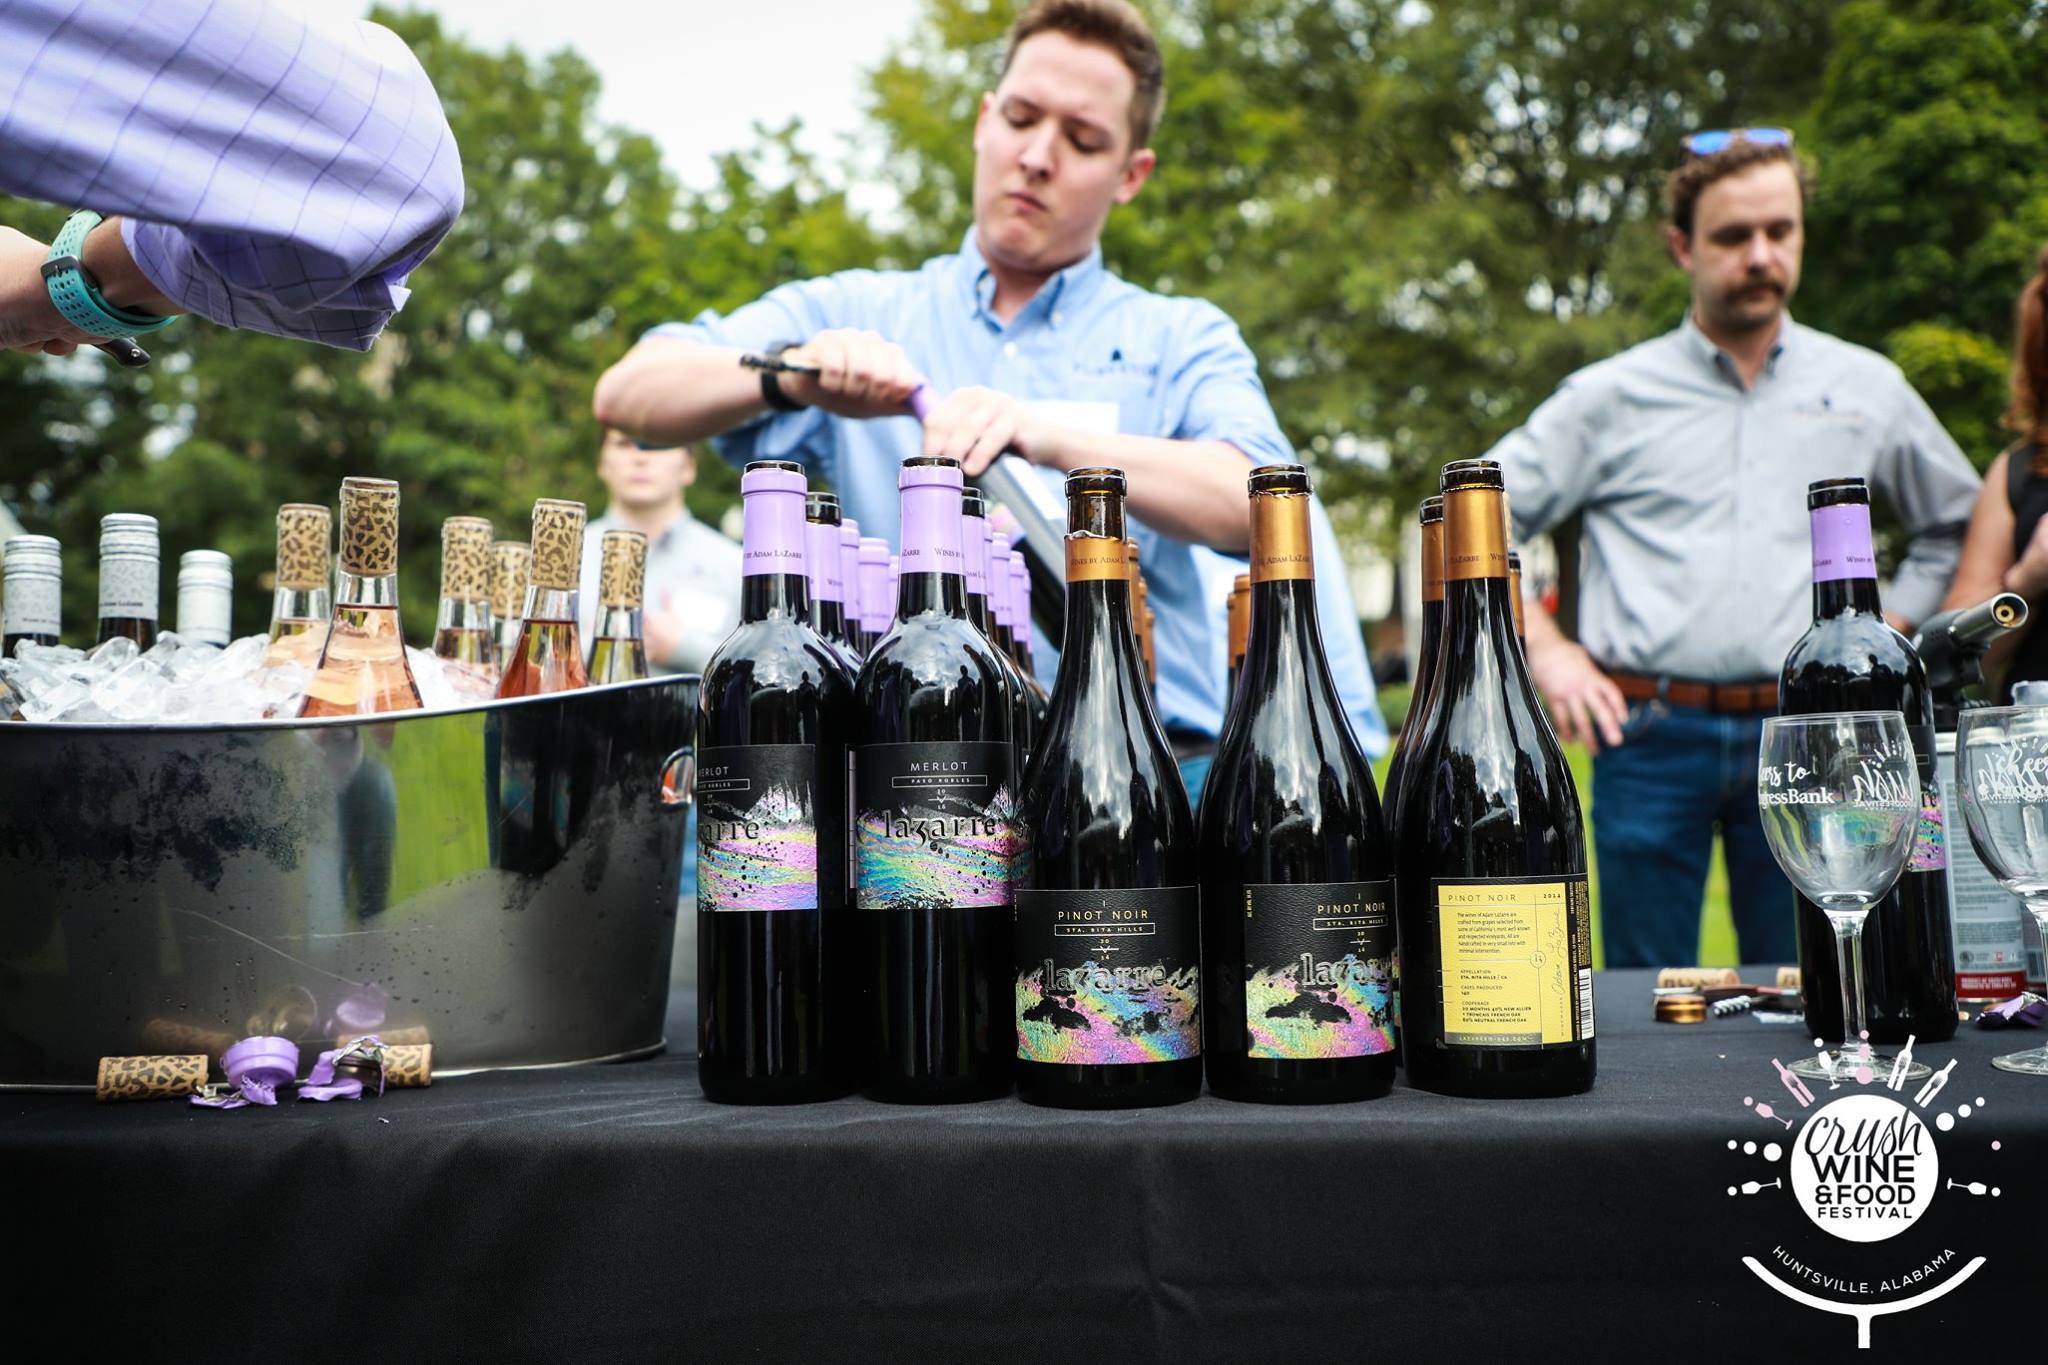 200546559 4214359281948392 747541890078293622 n Cheers! 3 reasons not to miss Crush Wine + Food Festival Sept. 25th. Save $10 with code BHAMNOW